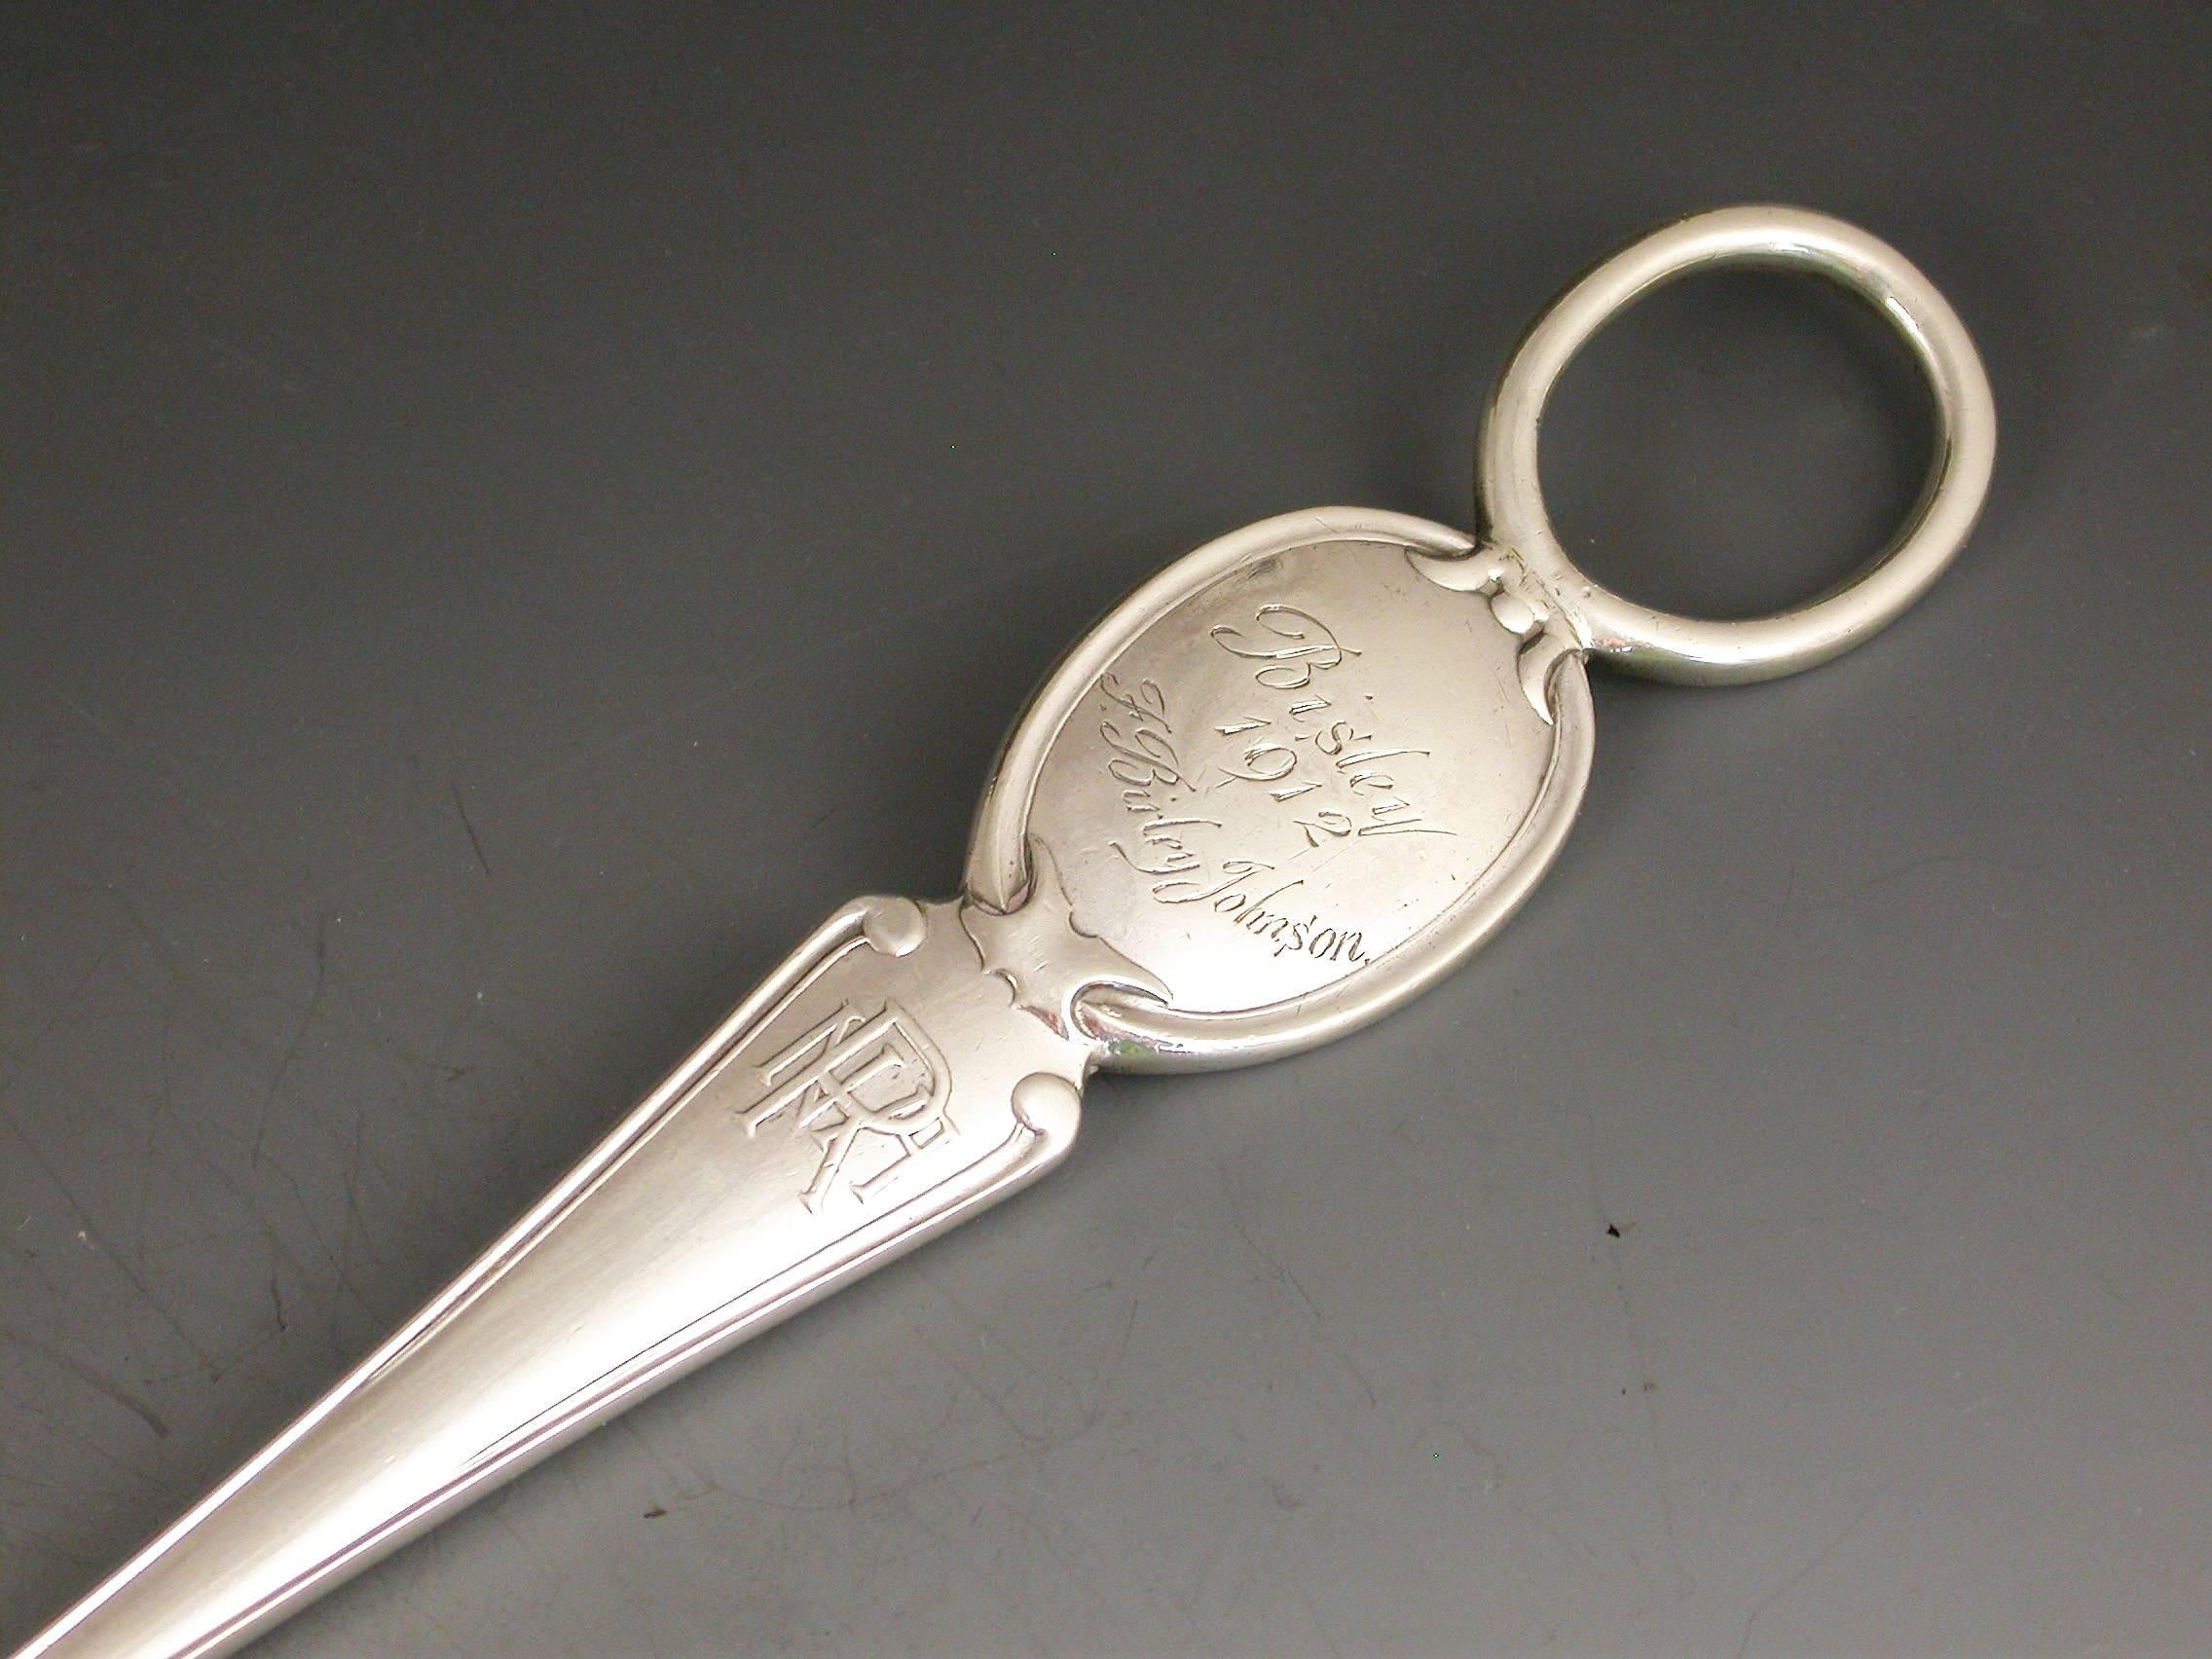 A good quality Edwardian cast silver National Rifle Association Shooting Prize, made in the form of a shaped letter opener or skewer, the handle engraved - 'Bisley 1912' and with the recipients name - F.Burley Johnson.

By Thomas Bradbury & Sons